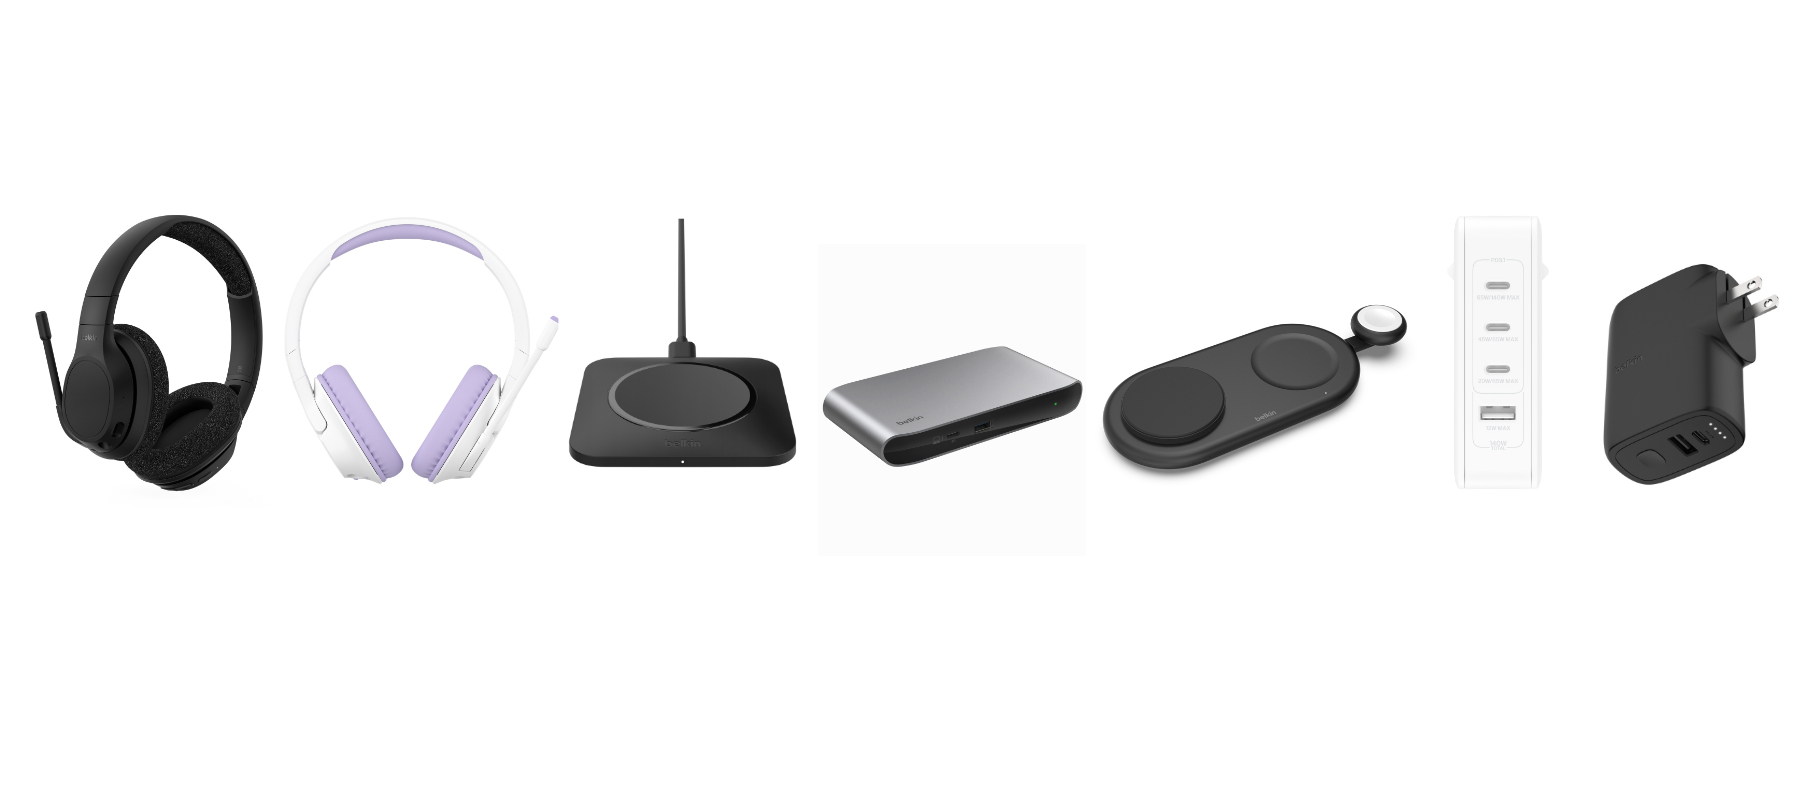 Belkin supercharges into CES 2024 with powerful new product lineup